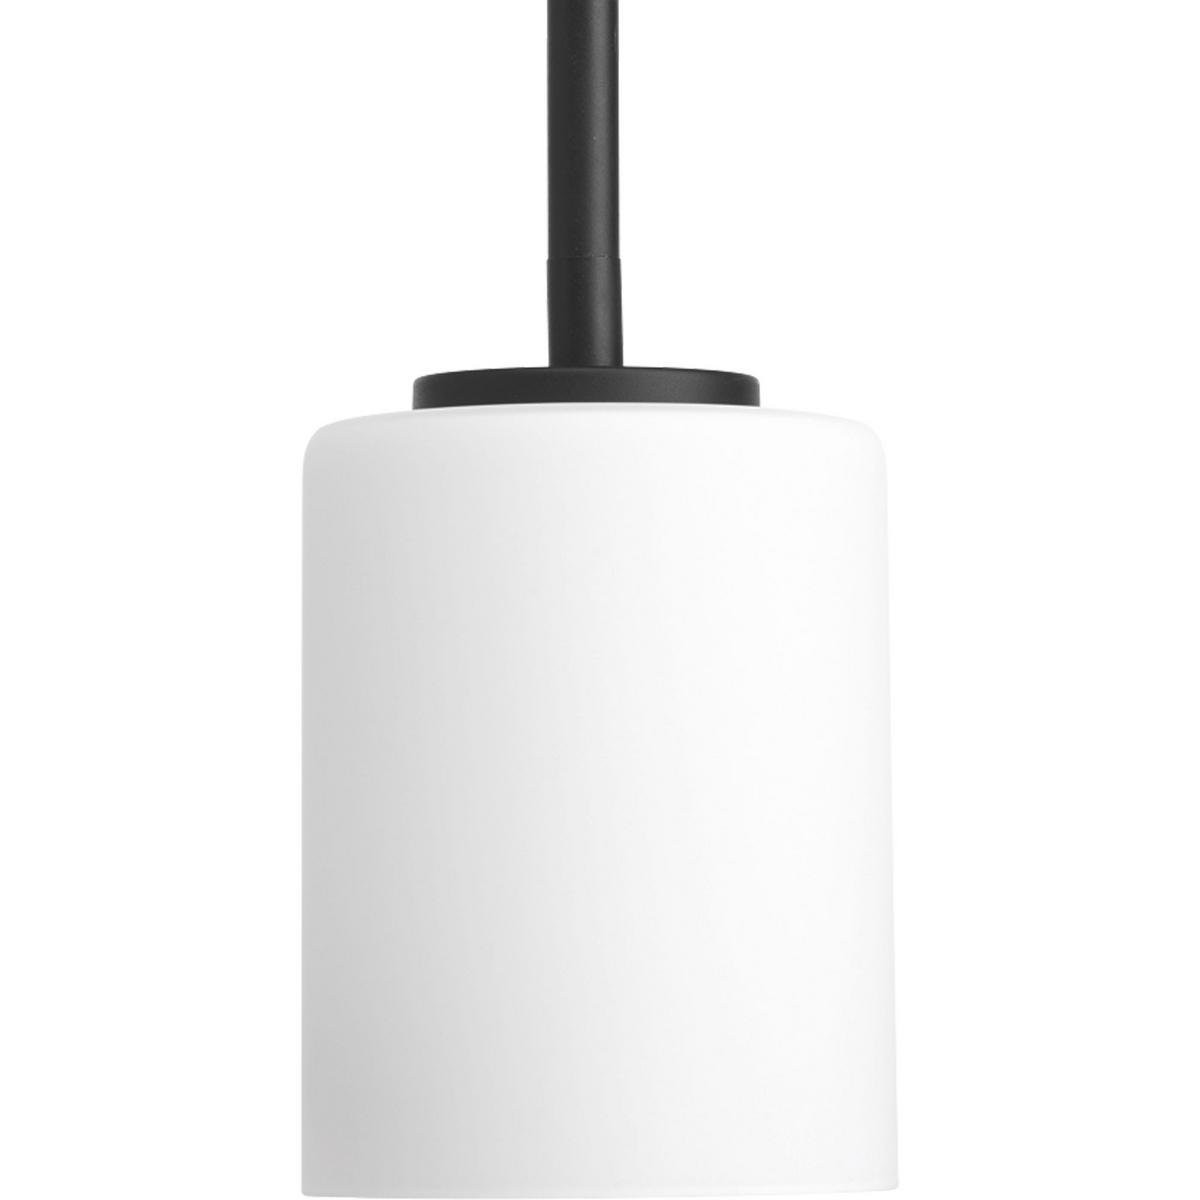 Hubbell P5170-31 One-light mini-pendant from the Replay Collection, feature smooth forms, linear details and a pleasingly elegant frame enhance a simplified modern look. Black finish.  ; Smooth forms and linear details. ; Pleasingly elegant frame. ; Simplified modern look